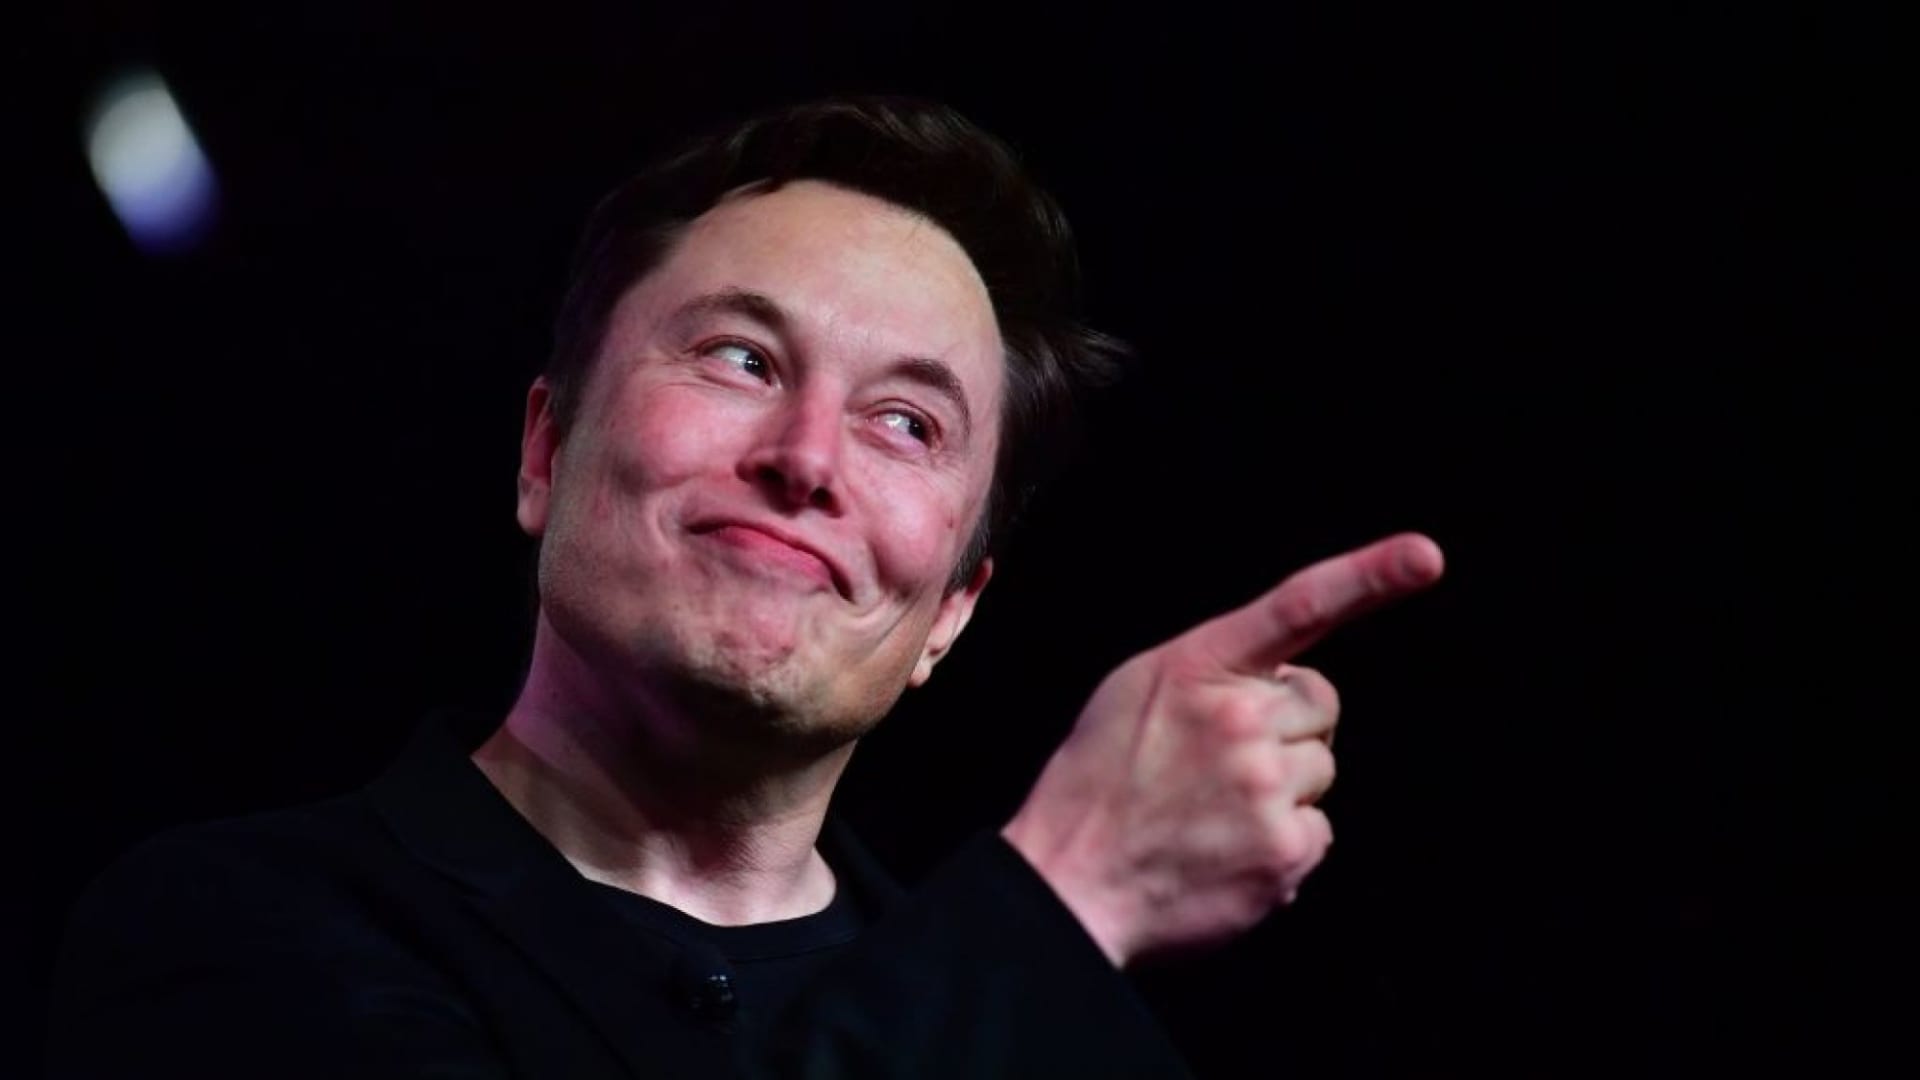 Elon Musk's Twitter Spat with Bernie Sanders Reveals the 1 Thing a Leader Should Never Do